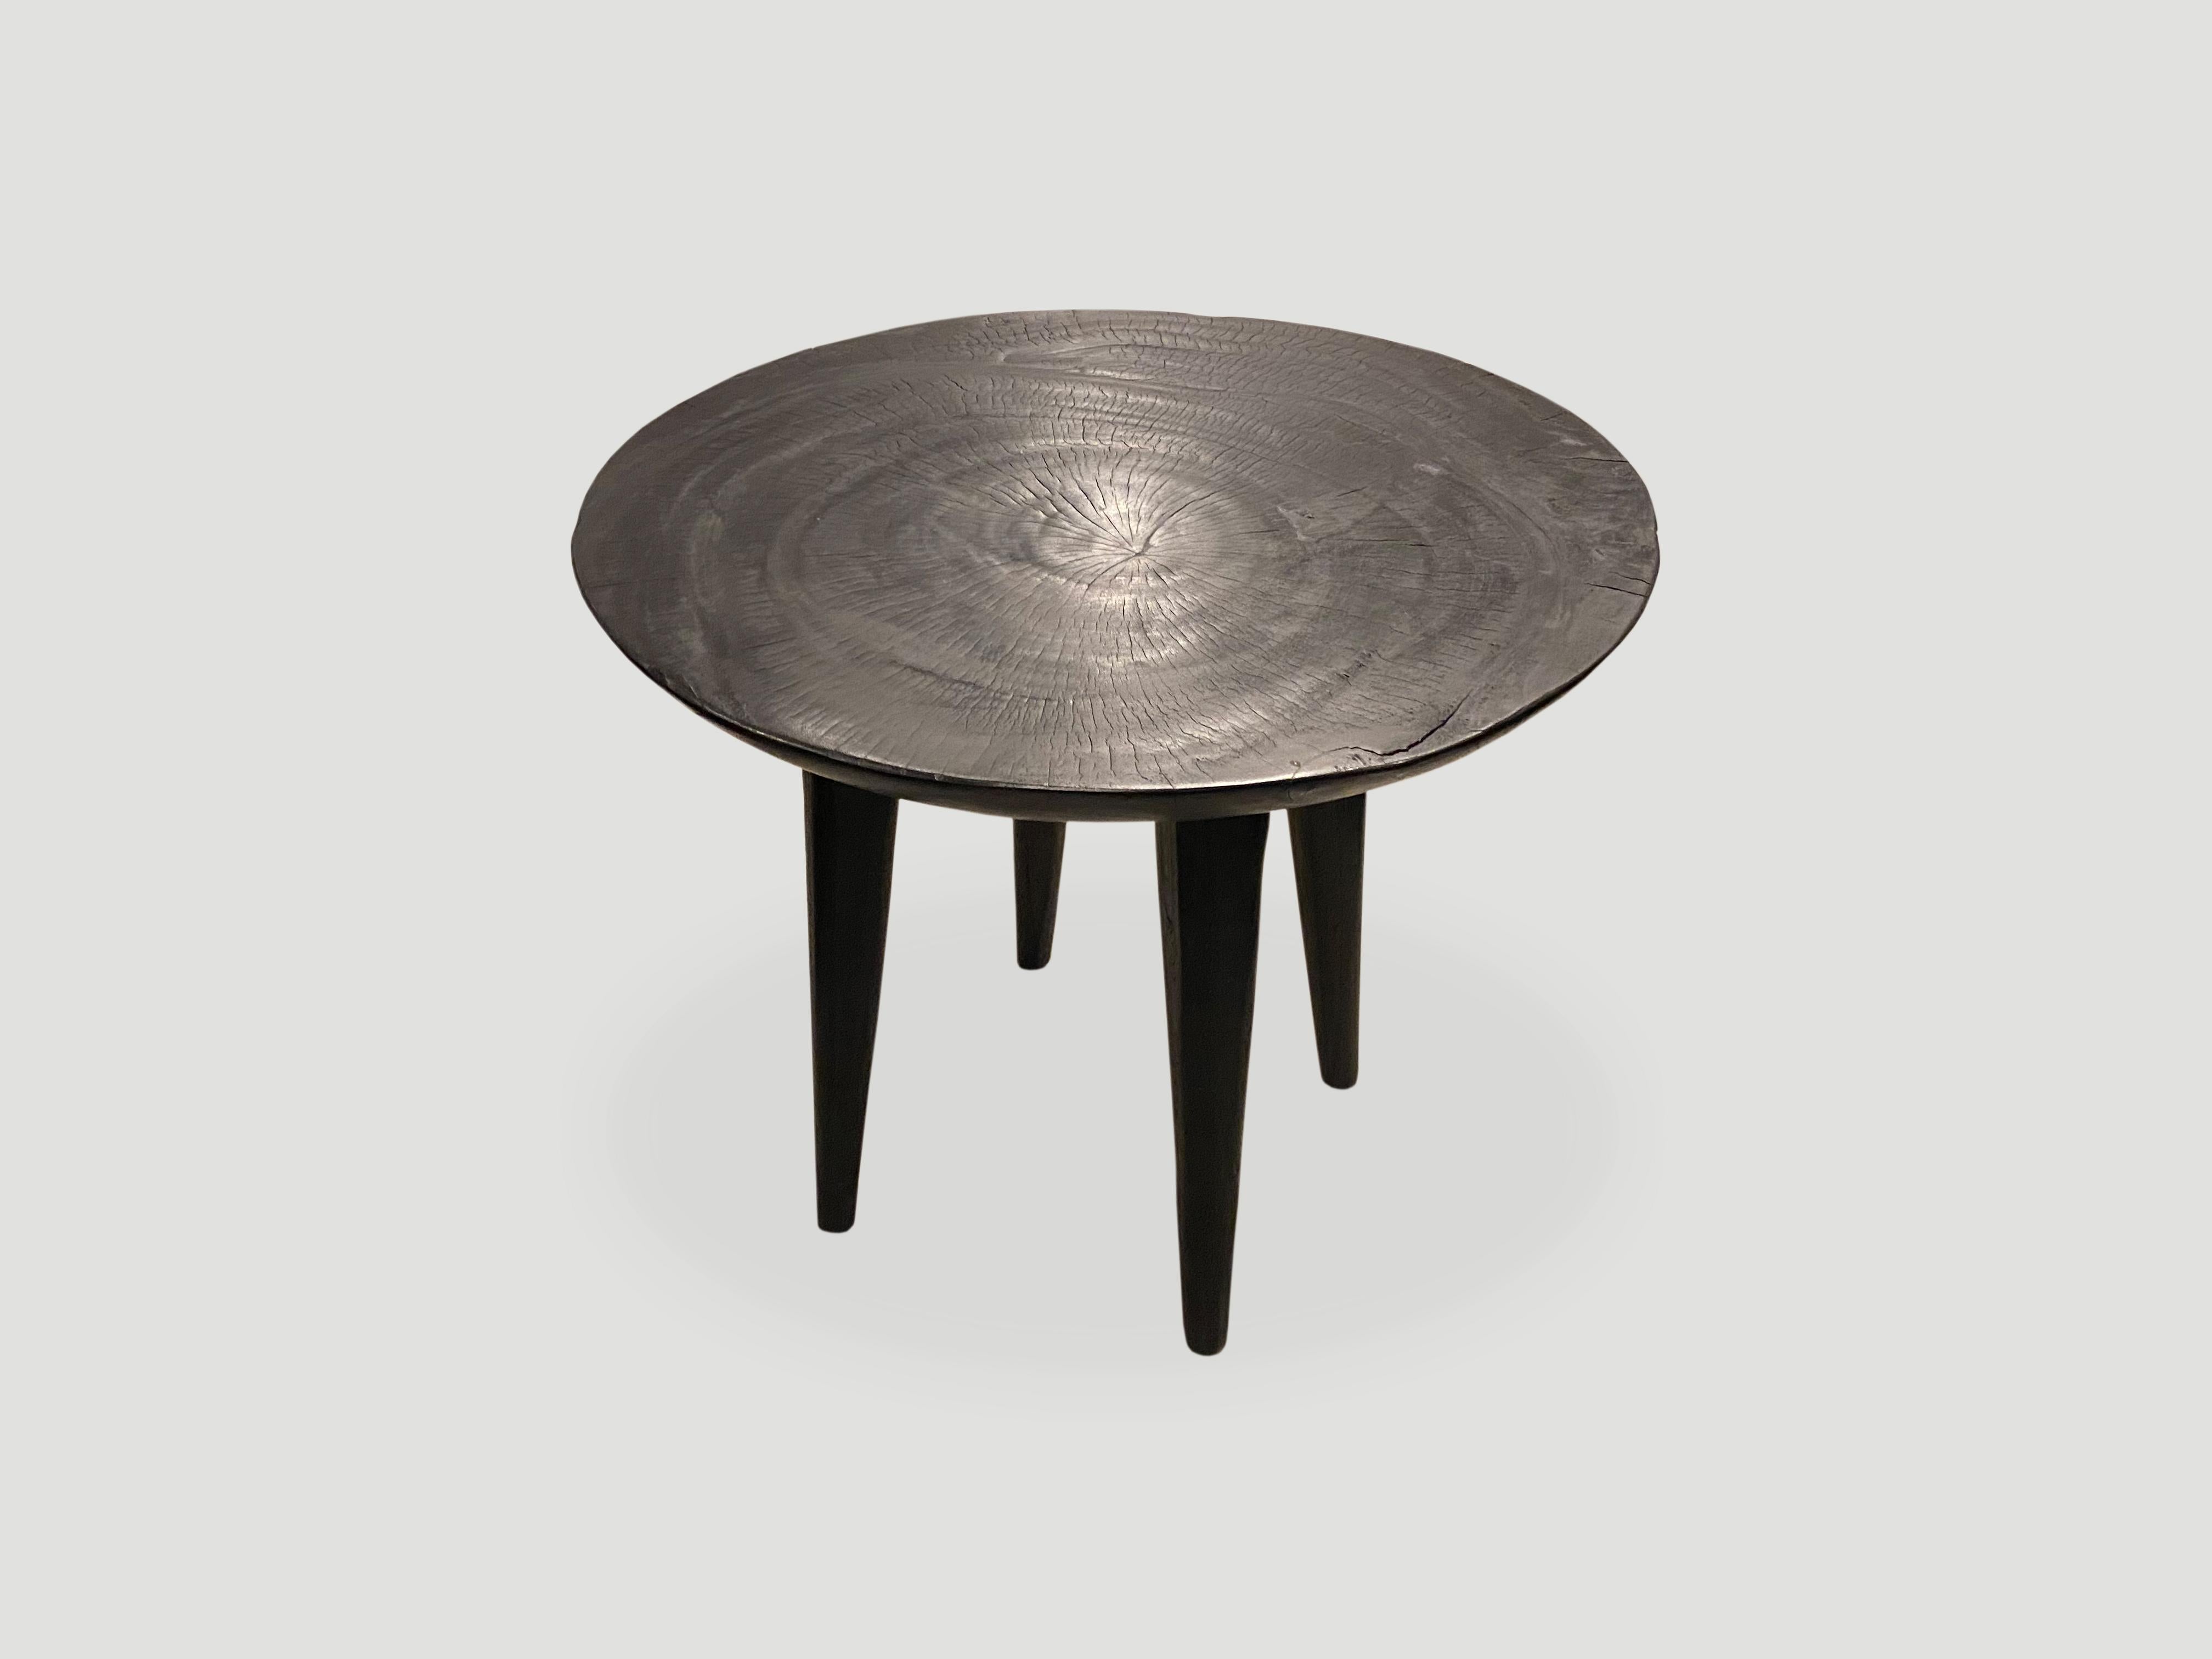 Minimalist charred side table with a four inch beveled top resting on cone style legs.

Own an Andrianna Shamaris original.

Andrianna Shamaris. The Leader In Modern Organic Design.